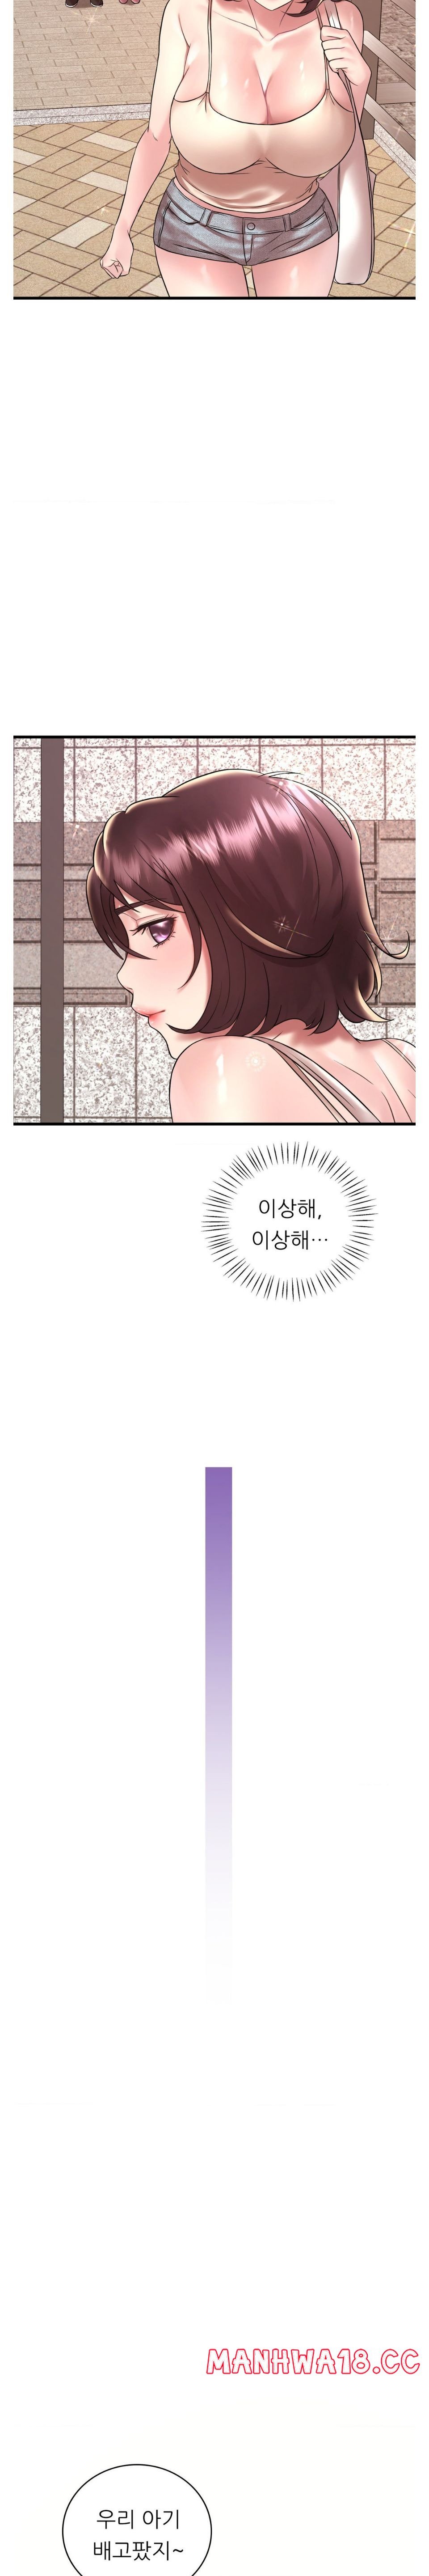 she-wants-to-get-drunk-raw-chap-39-18